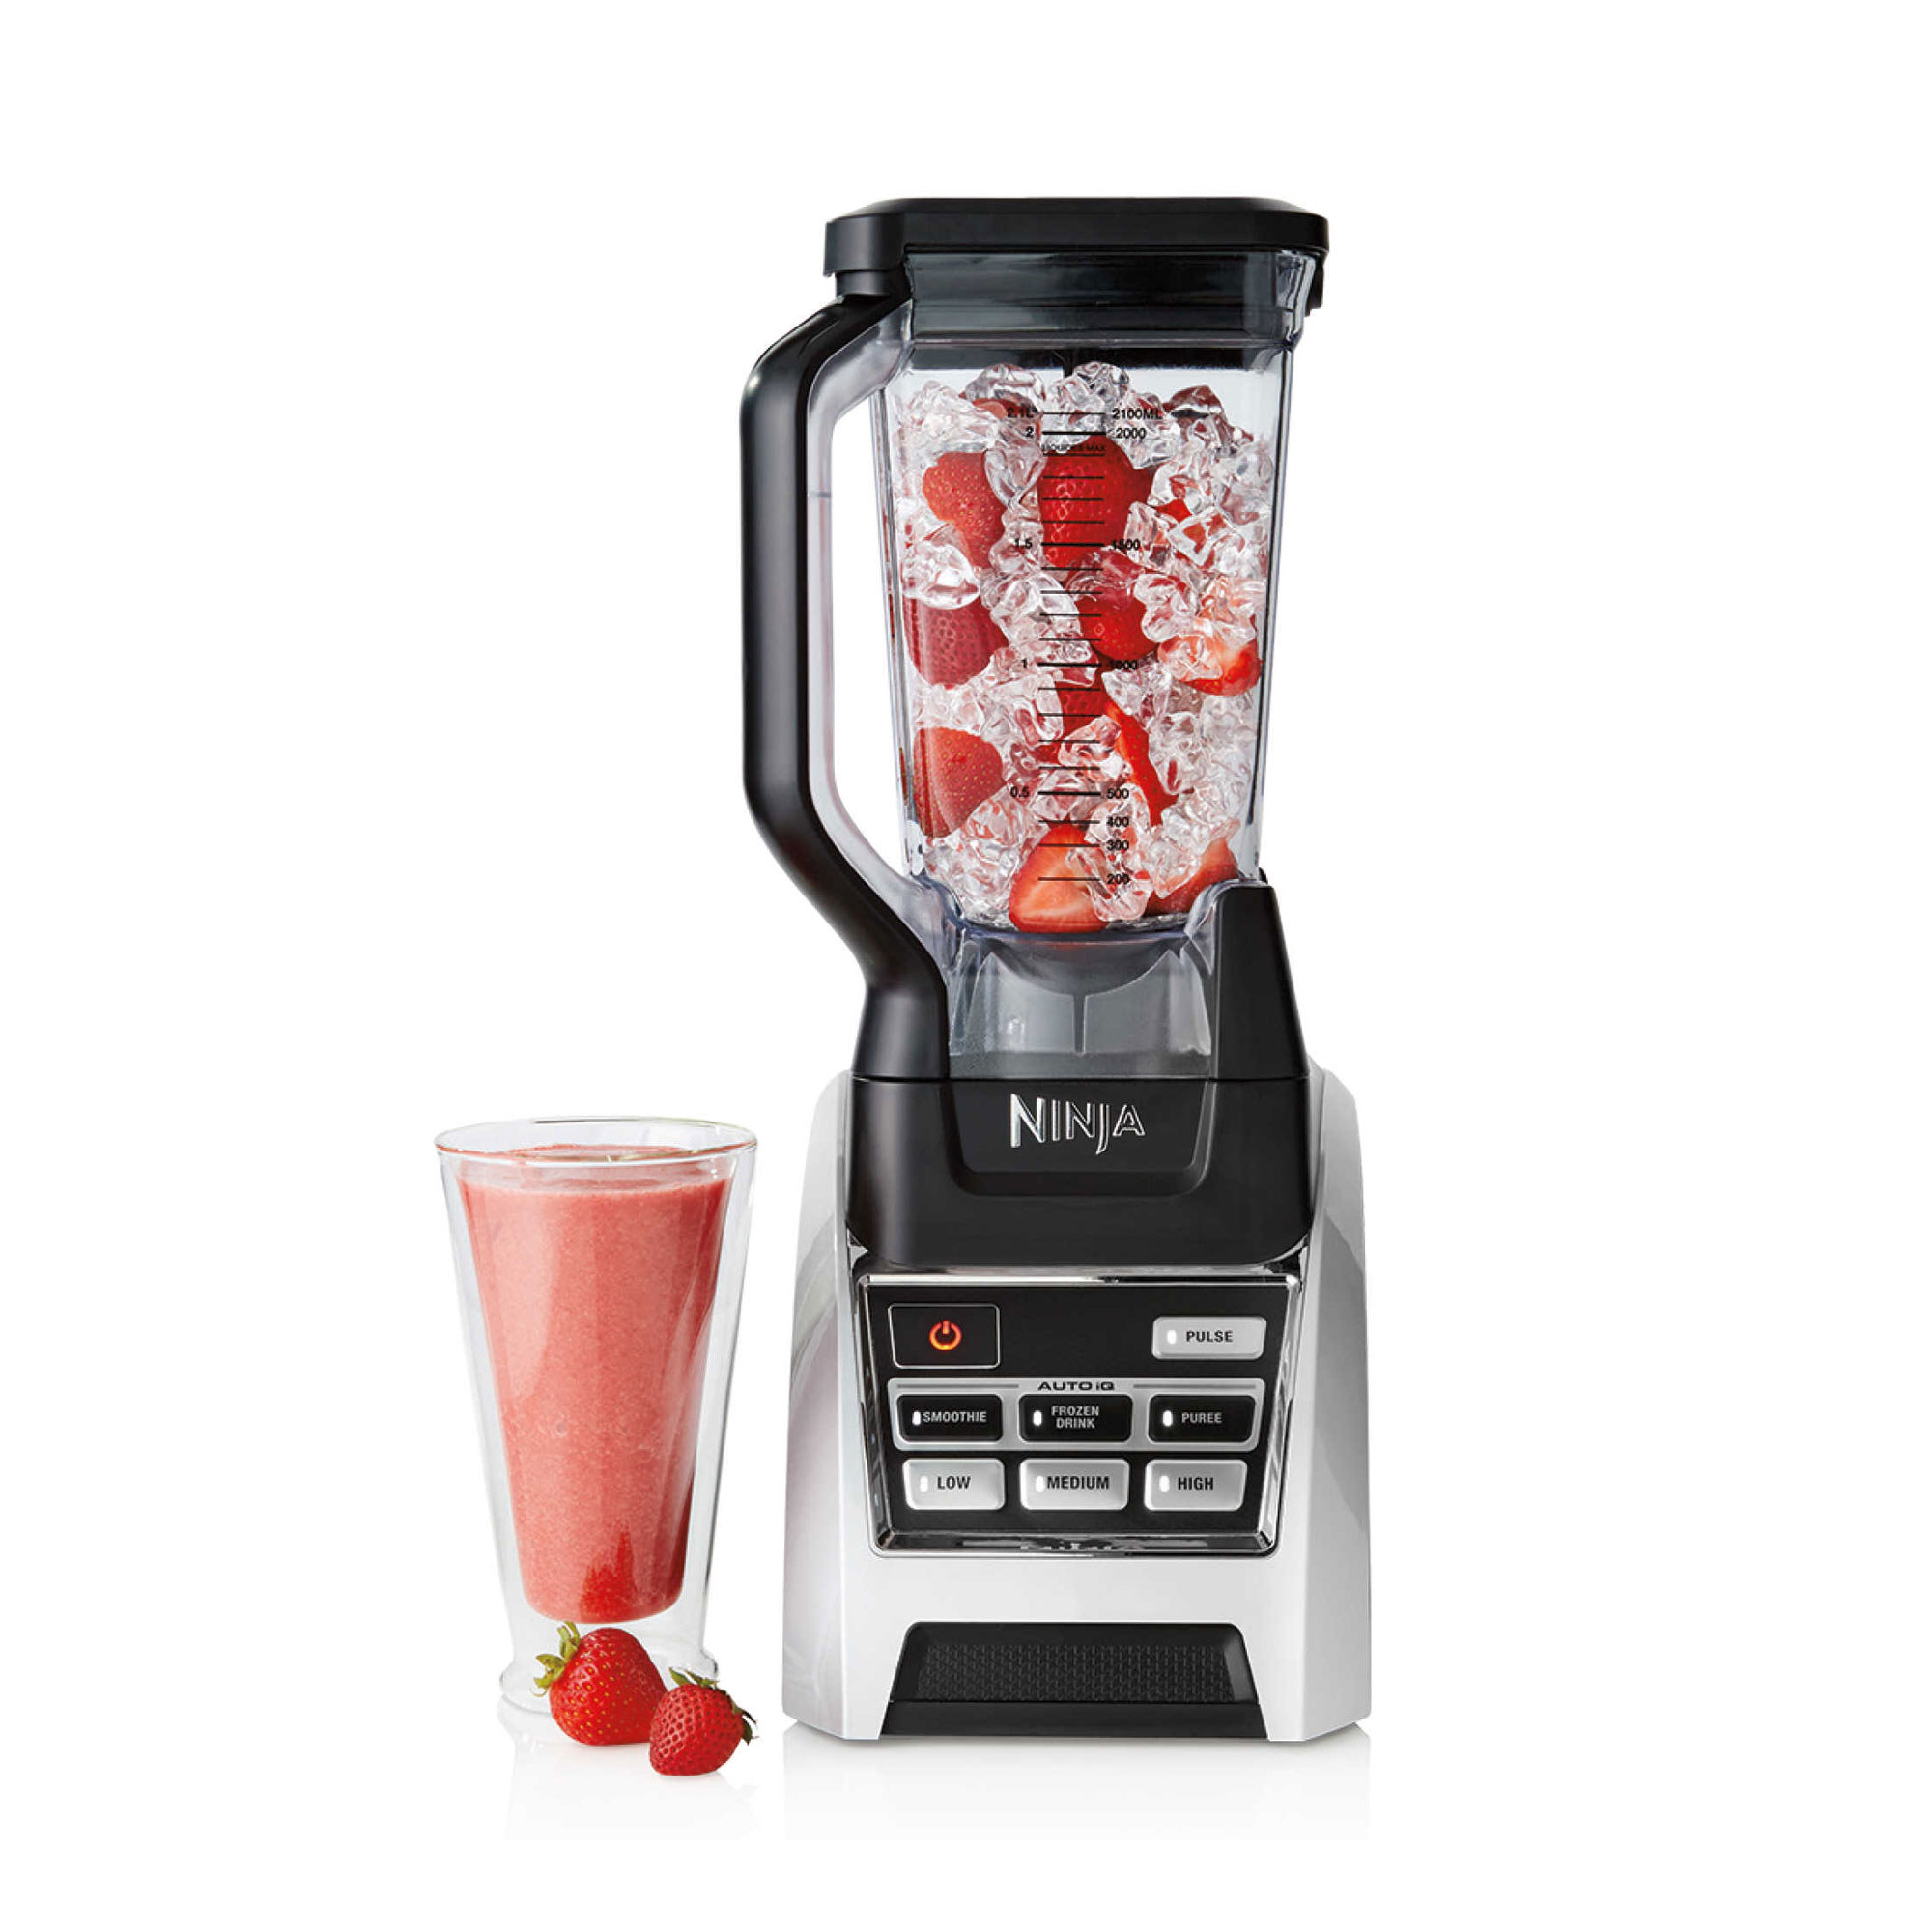 ninja blender with strawberries and ice in it and a strawberry smoothie next to it